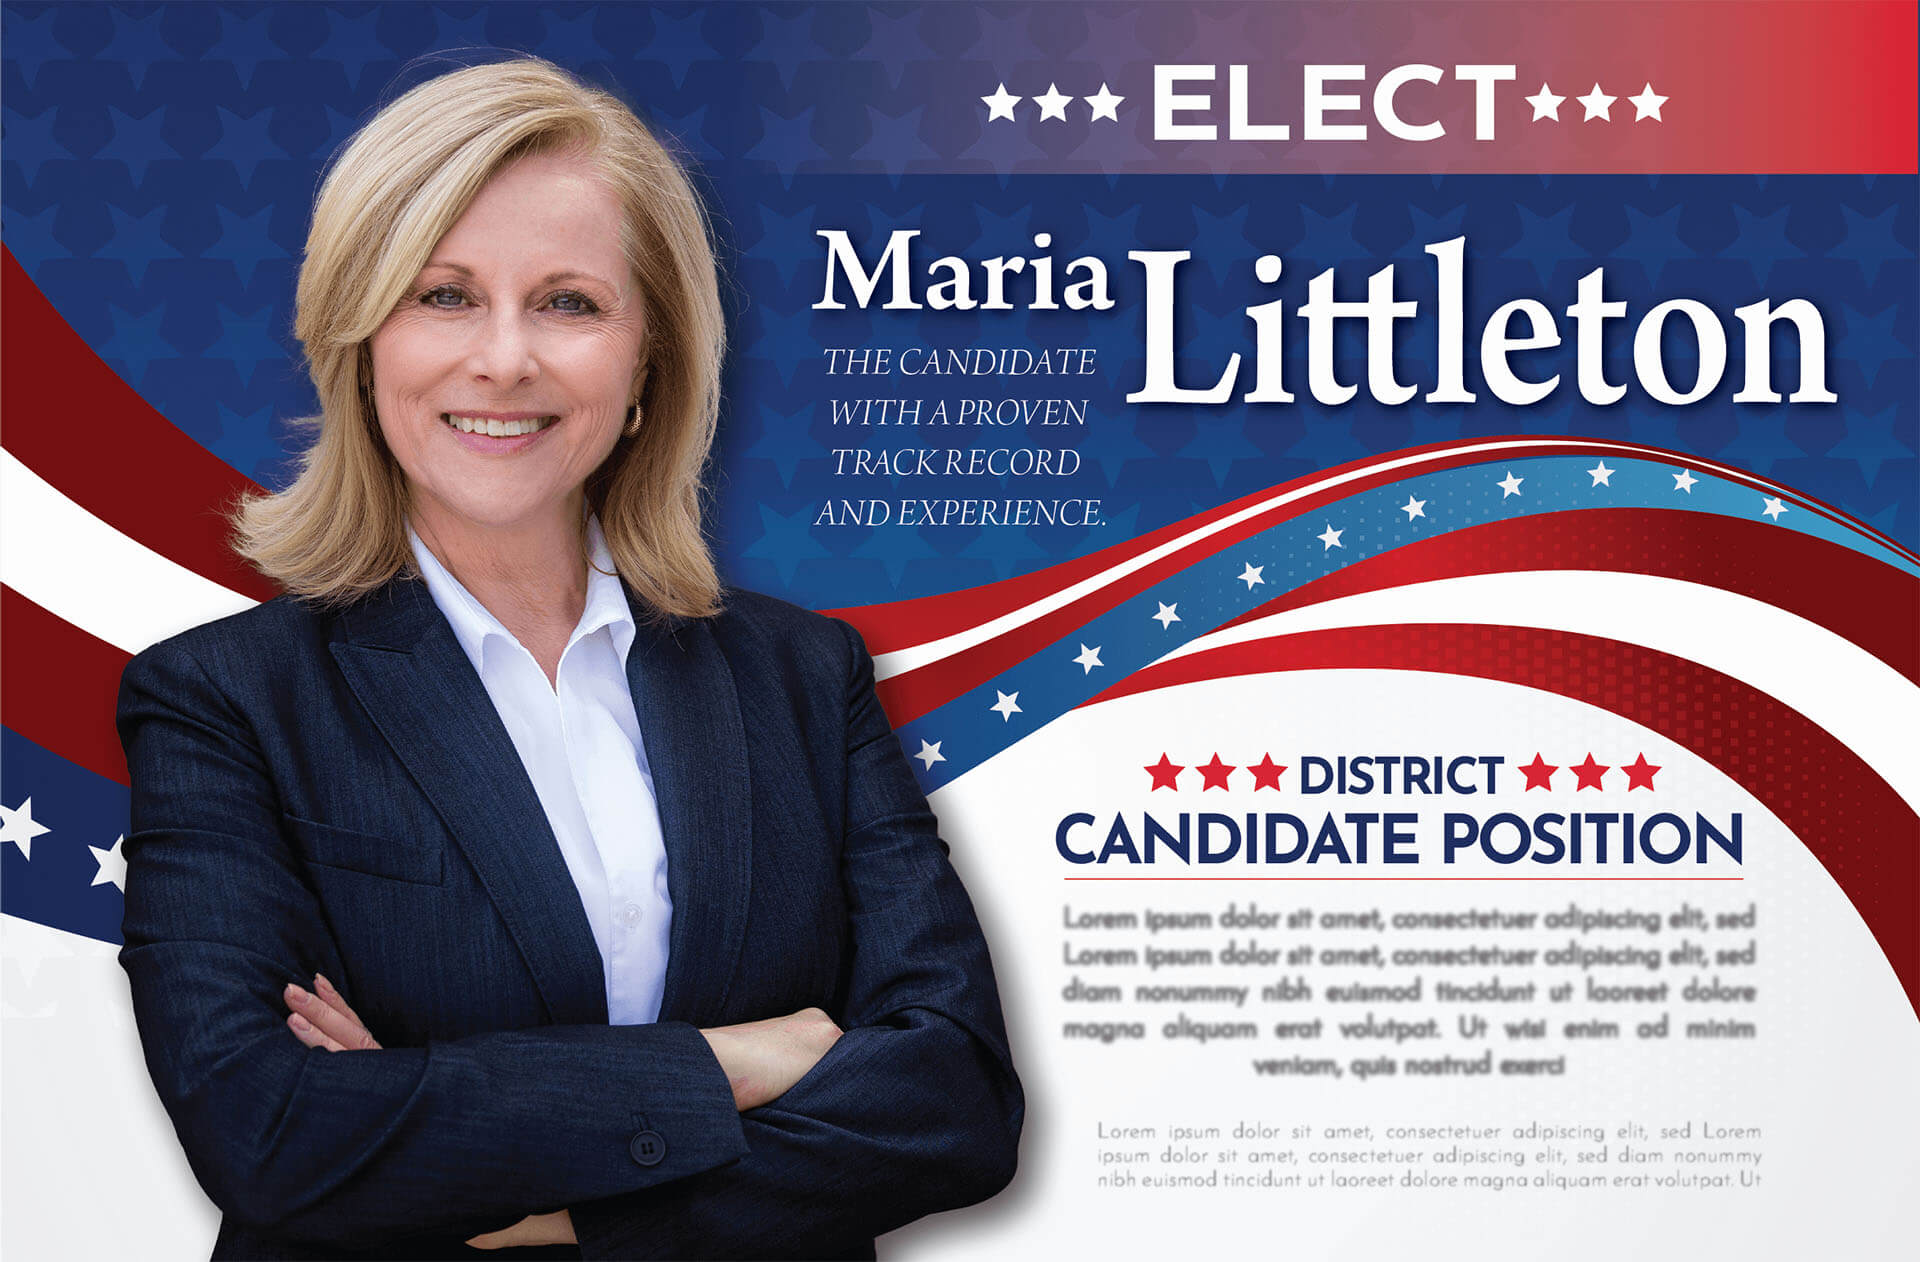 political direct mail postcard example - maria littleton